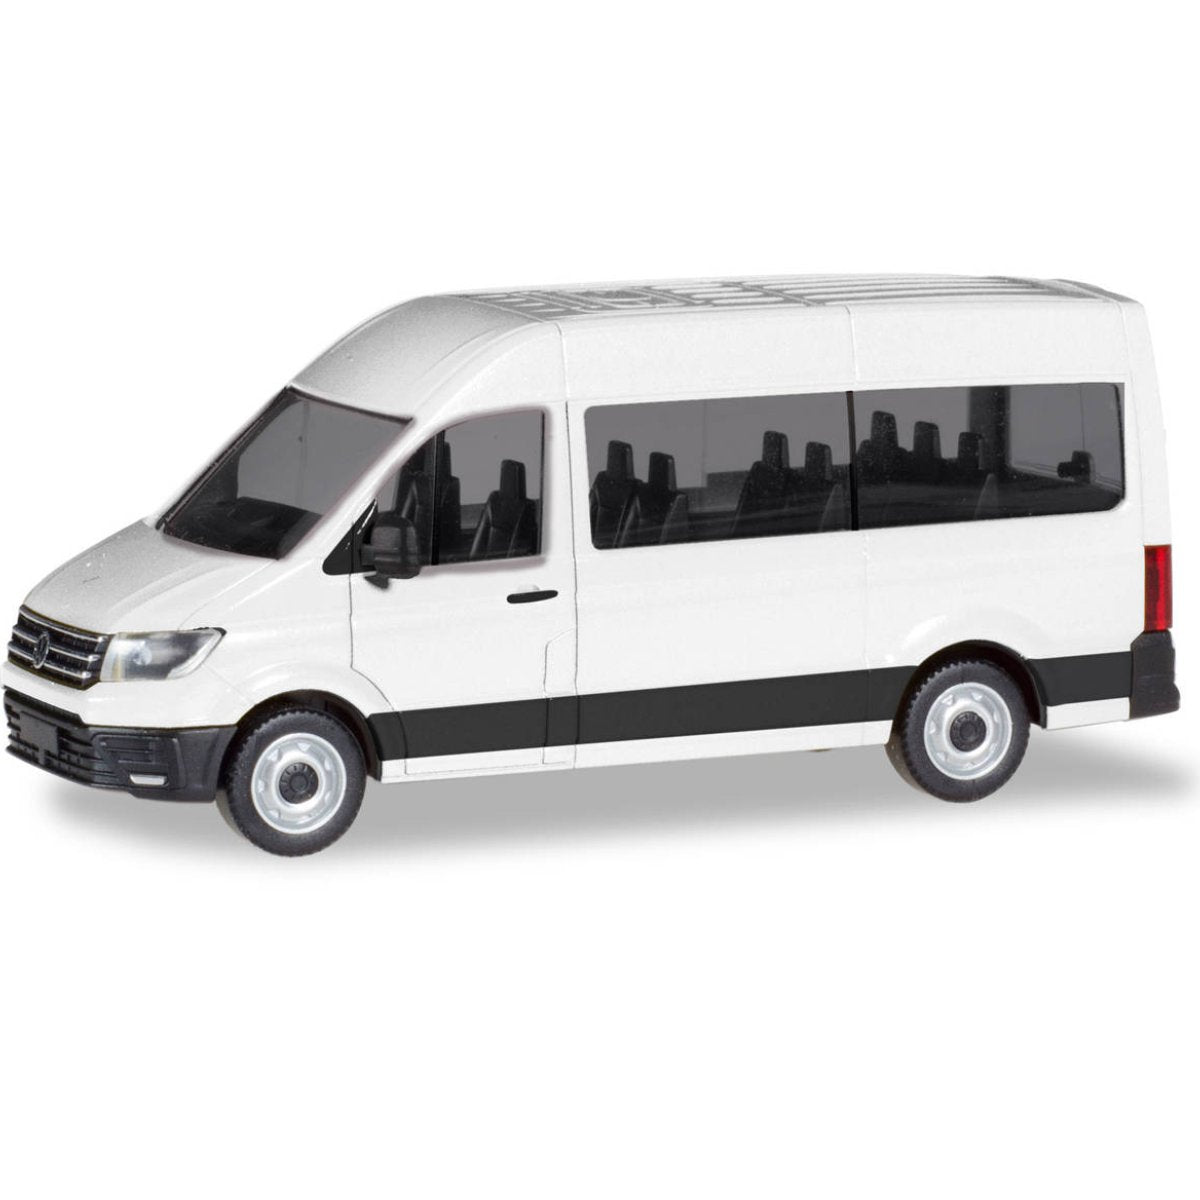 Herpa Mini Kit - VW Crafter Bus HD White - 1:87 Scale - Phillips Hobbies